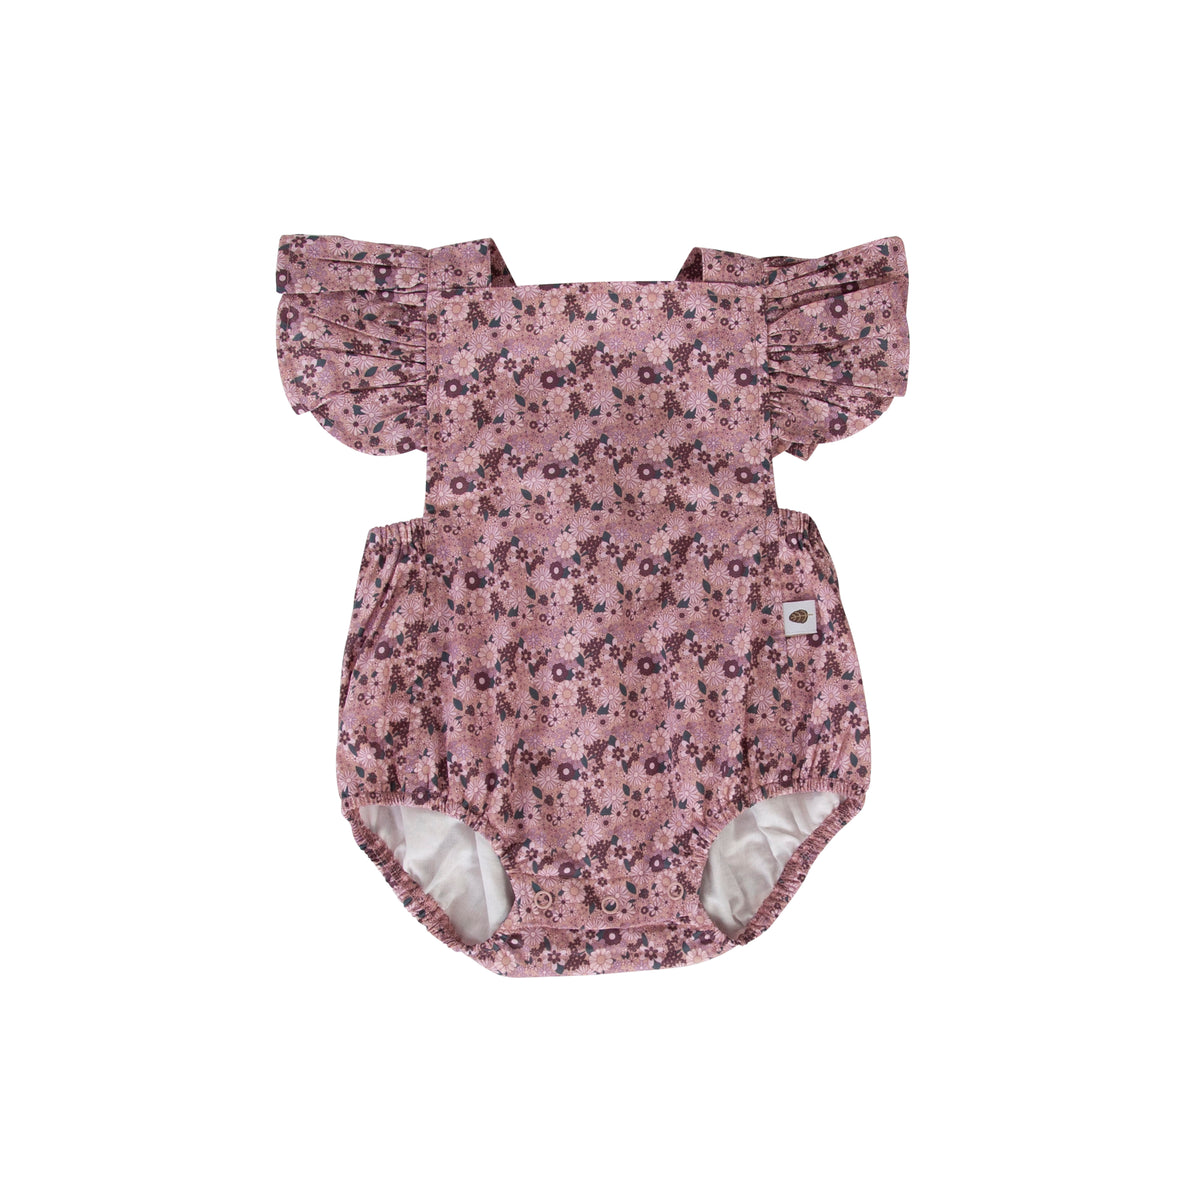 Ling Playsuit - Rose Ditzy Floral